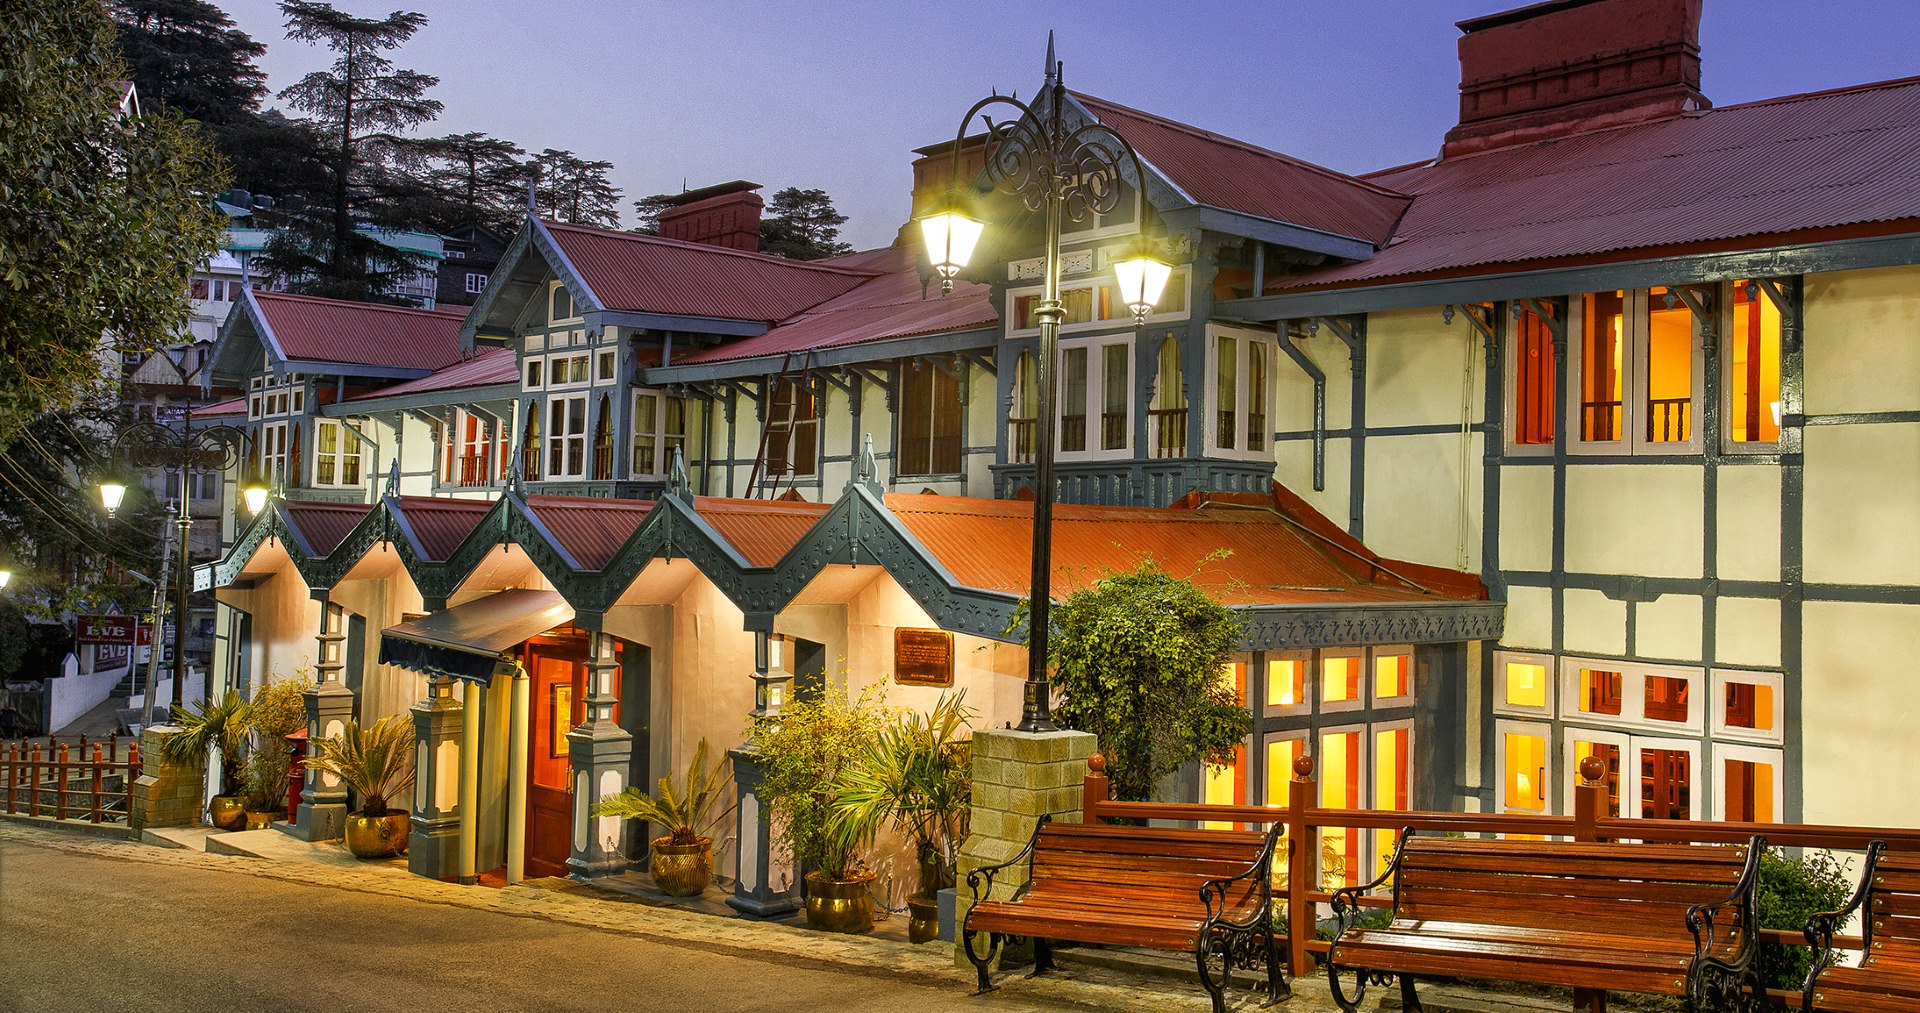 About Clarkes Hotel Shimla History and Heritage